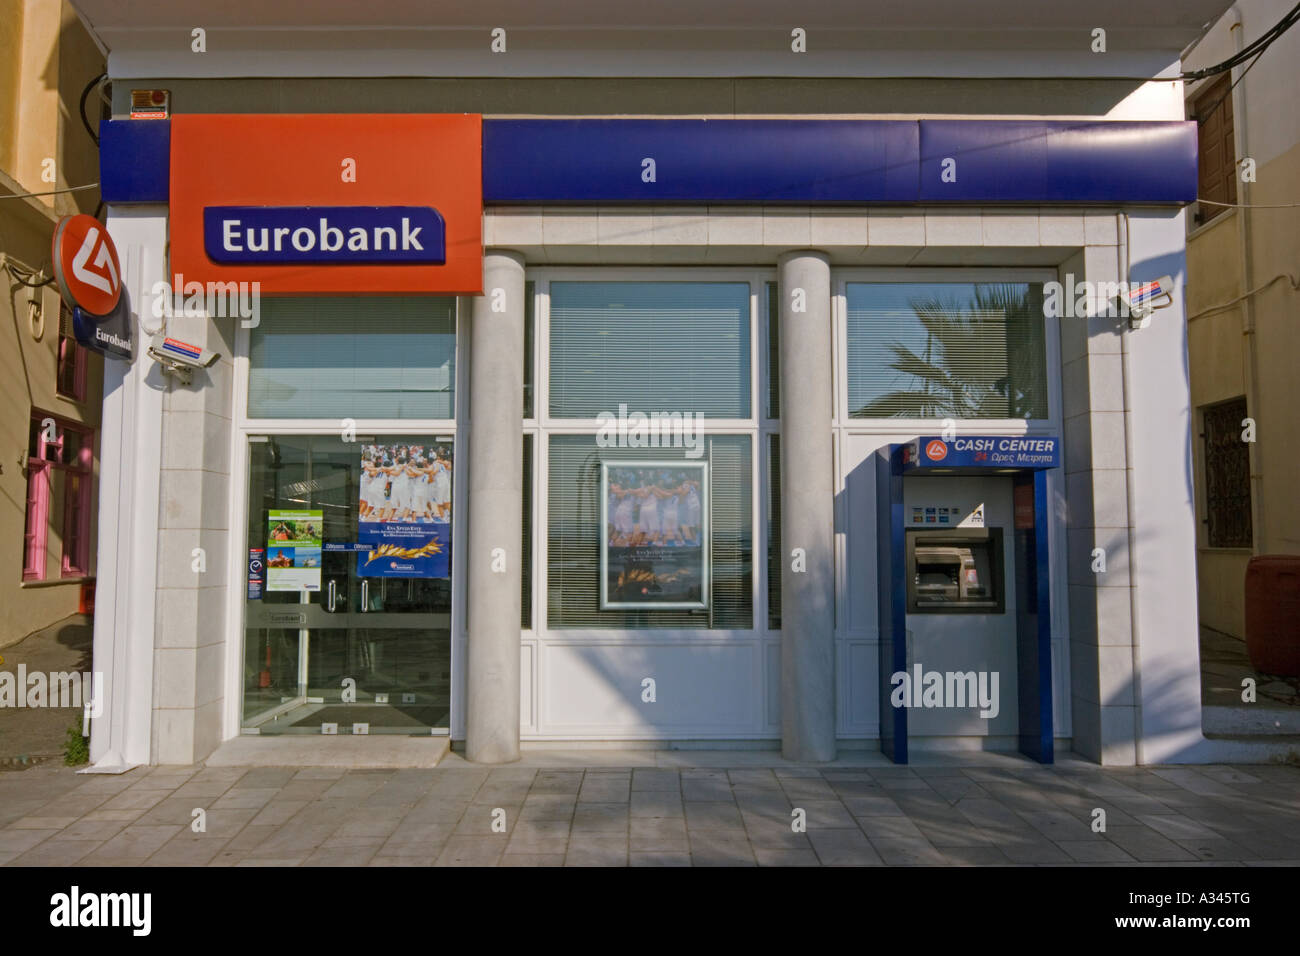 Eurobank Greece High Resolution Stock Photography and Images - Alamy